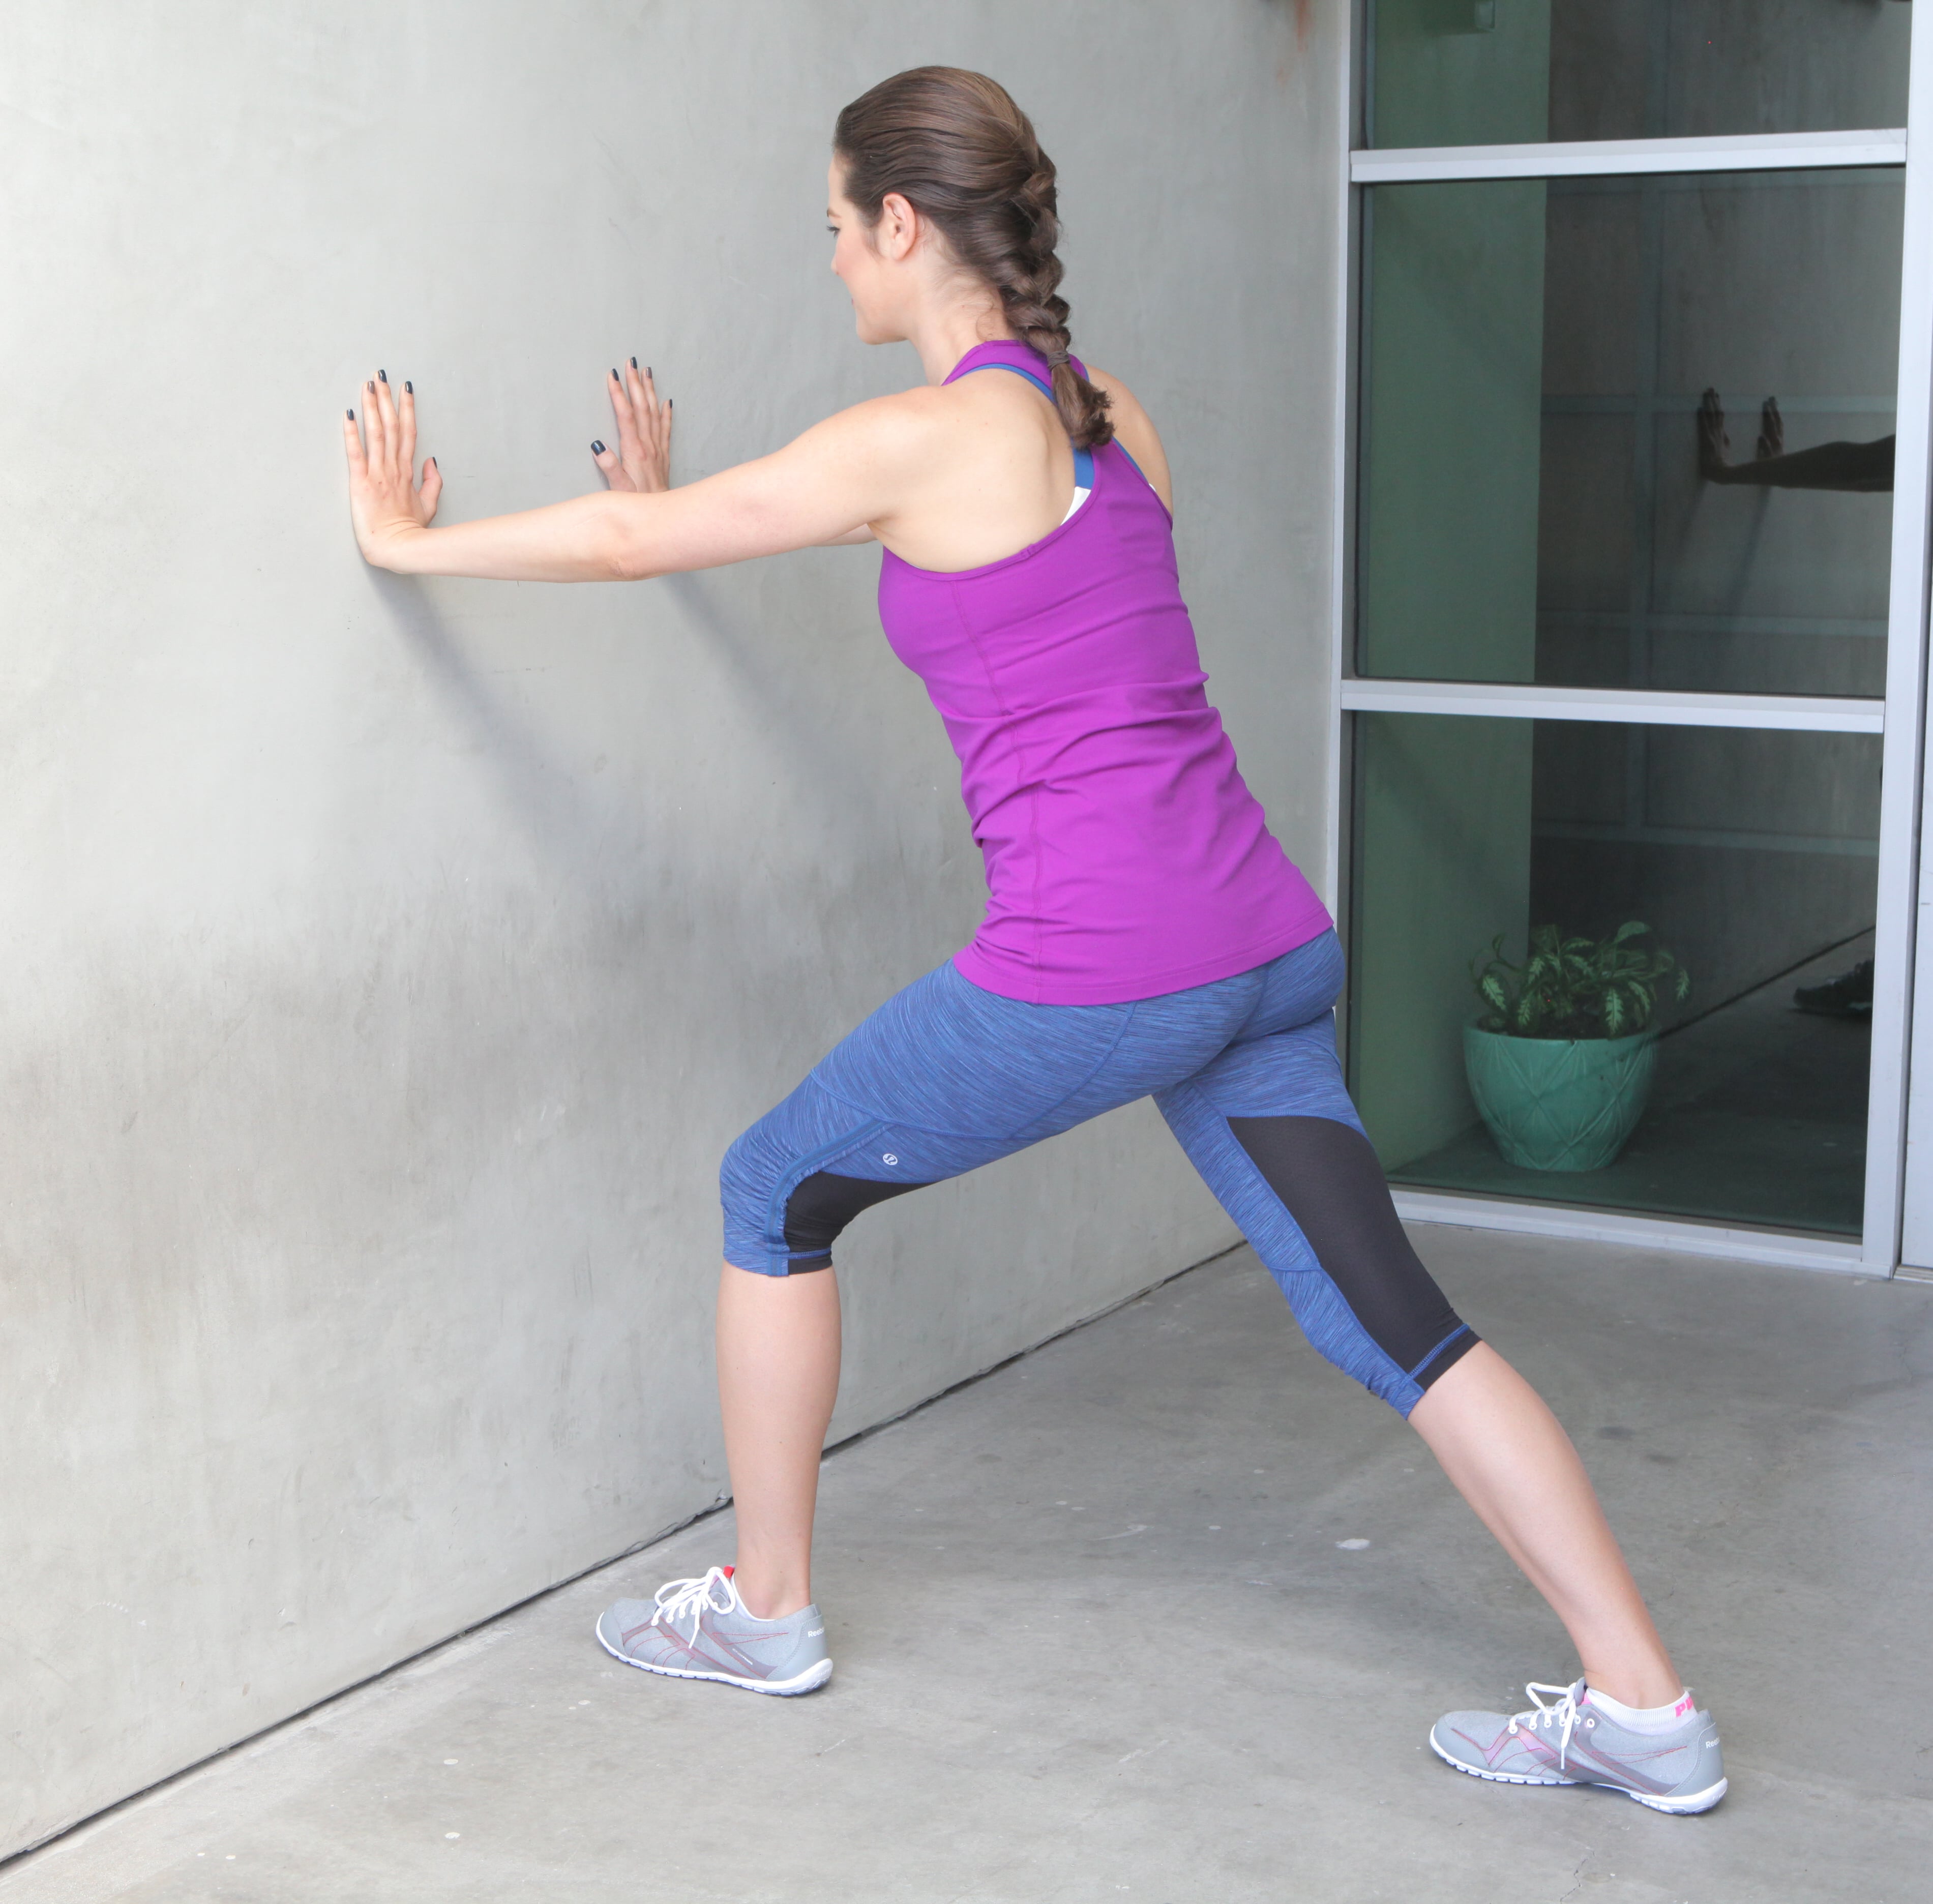 5 Stretches for Walkers To Do Before Hitting the Pavement